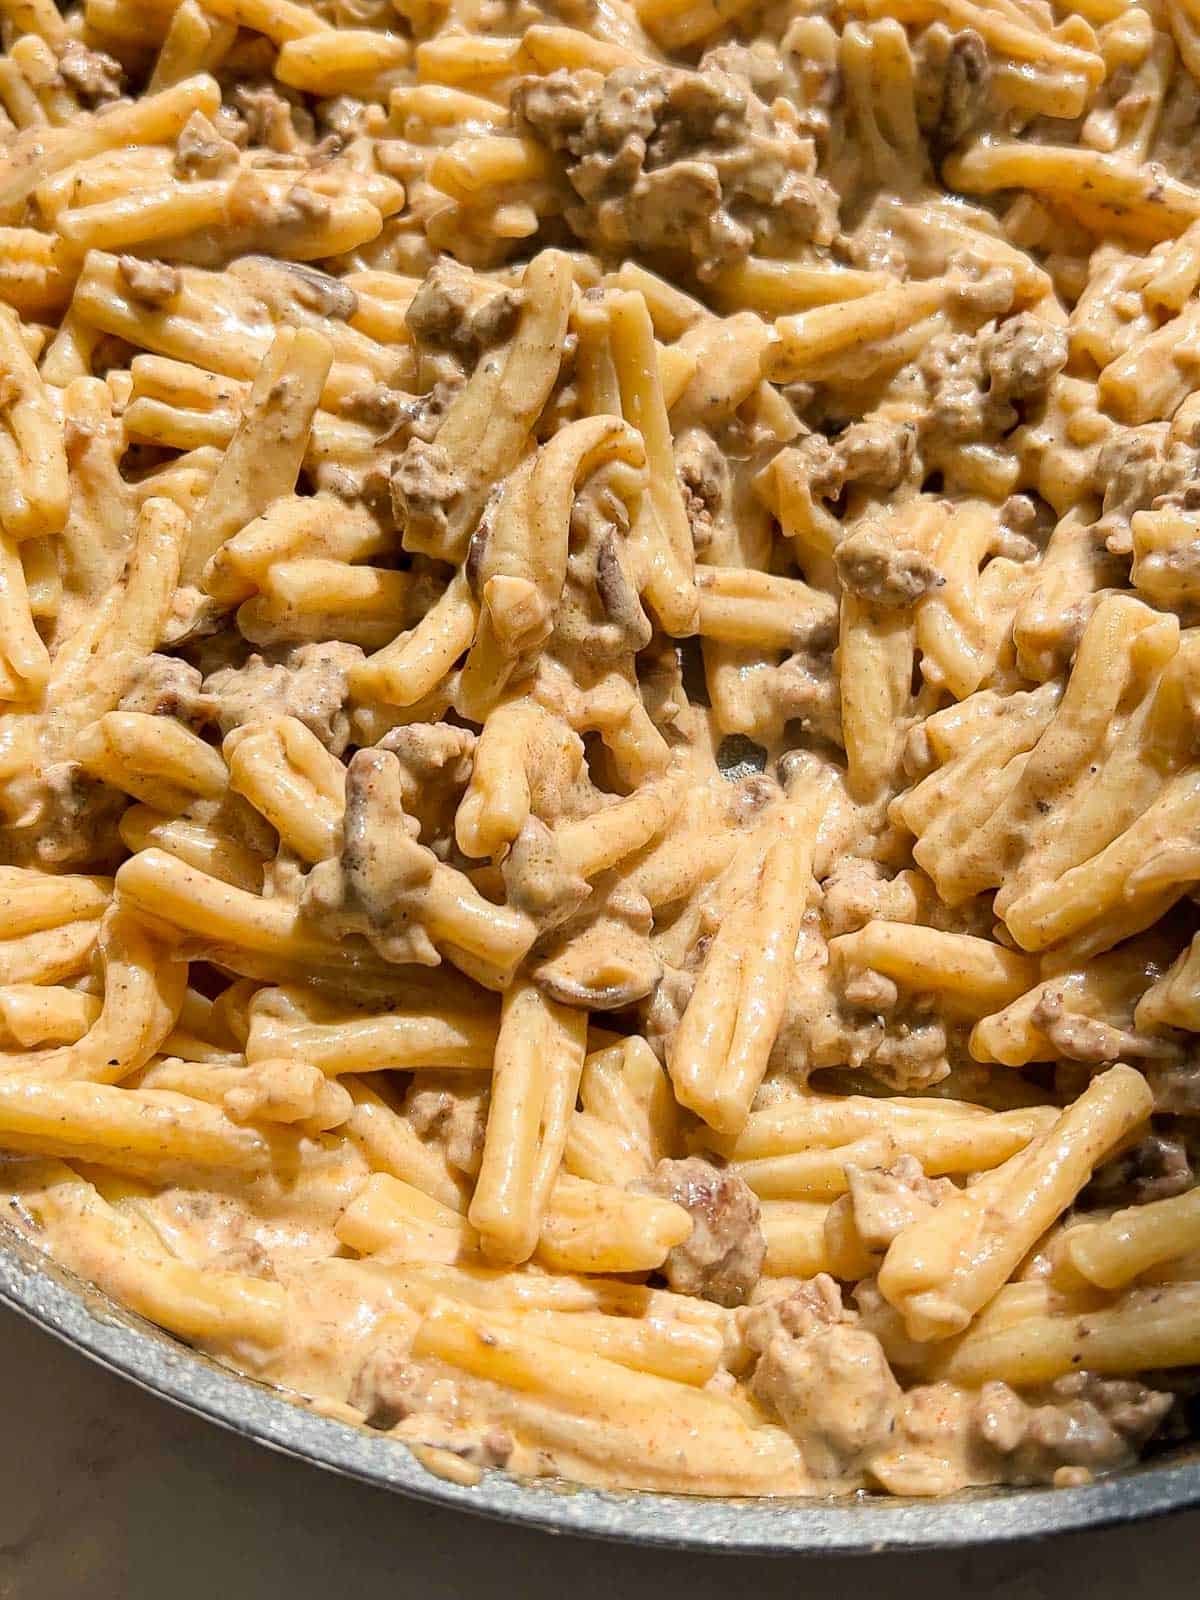 A large pan with a pasta dish made with ground beef, mushrooms, onions, and a sour cream sauce.